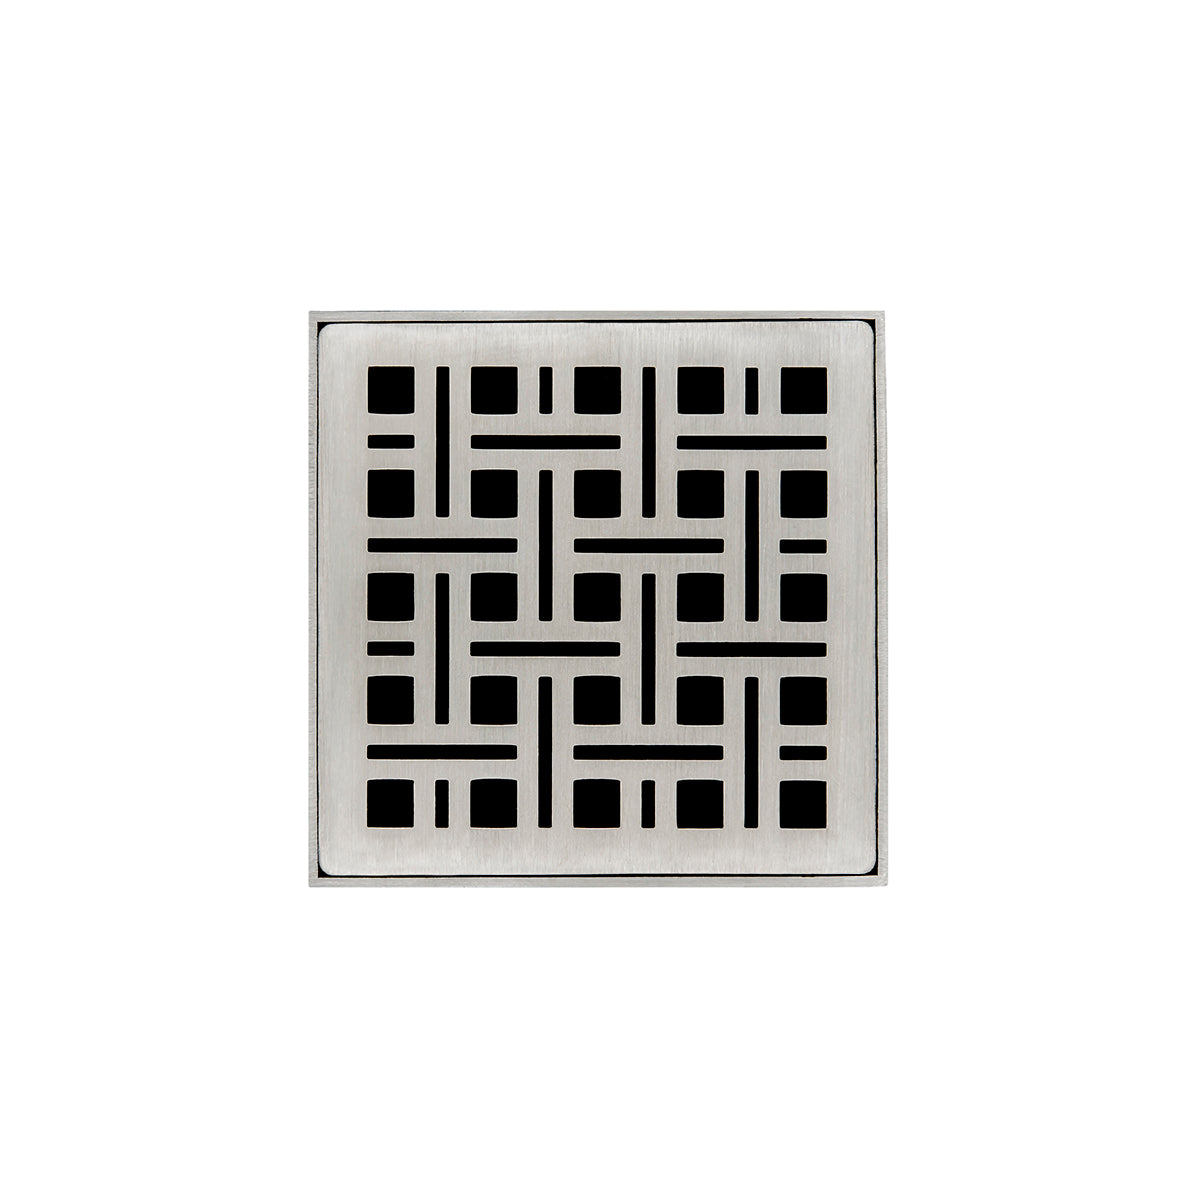 Infinity Drain 4" x 4" Strainer Premium Center Drain Kit with Weave Pattern Decorative Plate and 2" Throat for VD 4